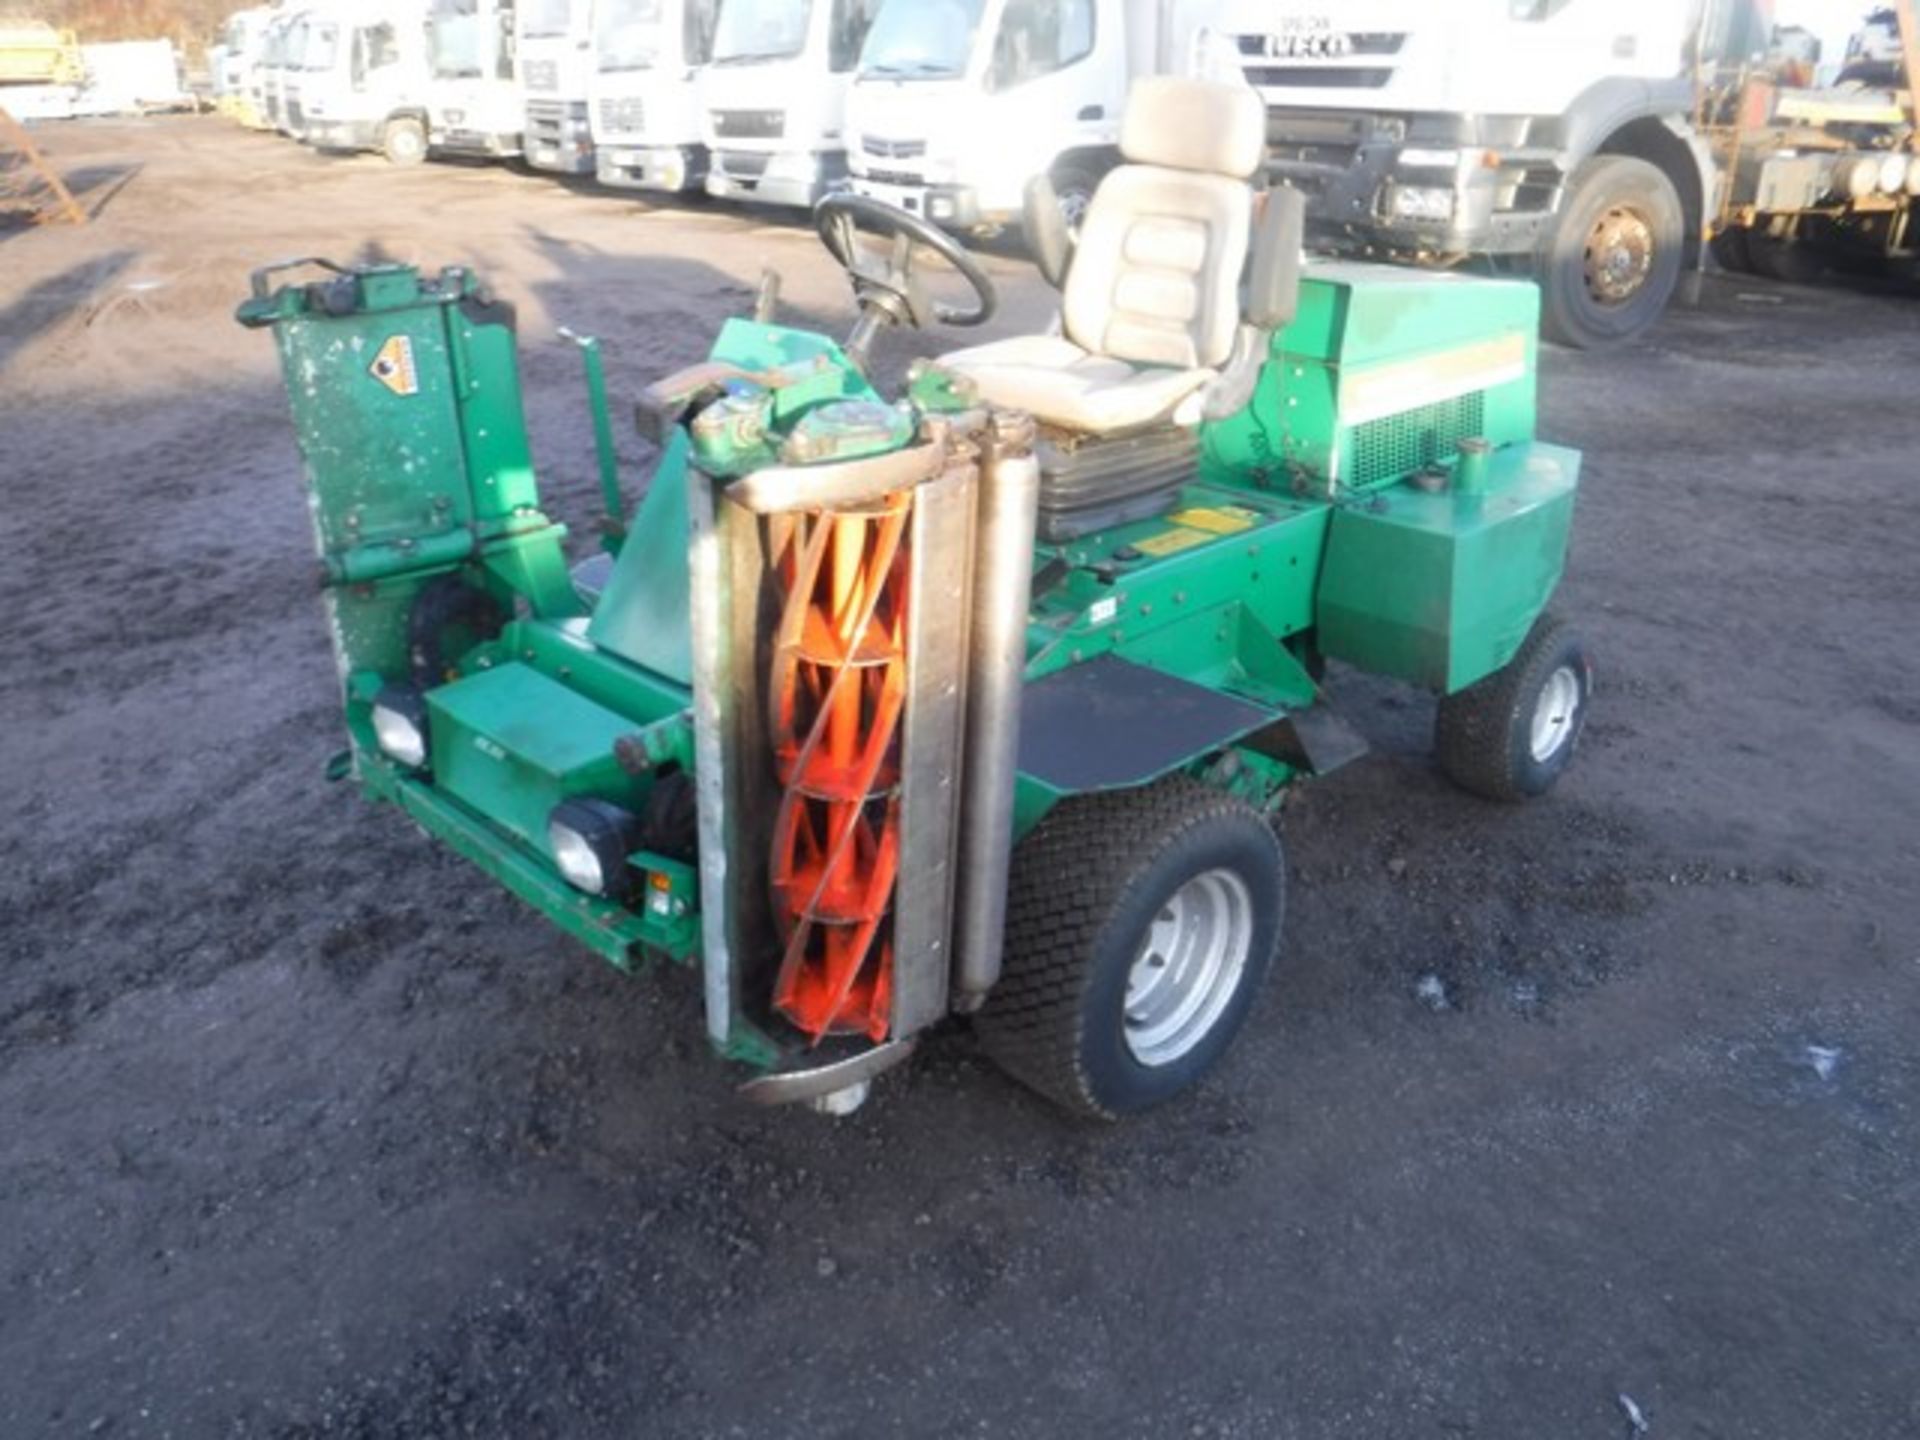 RANSOMES highway mower 3075 hrs.S/N WJ000567. Reg No SN51 ZXC - Image 7 of 7